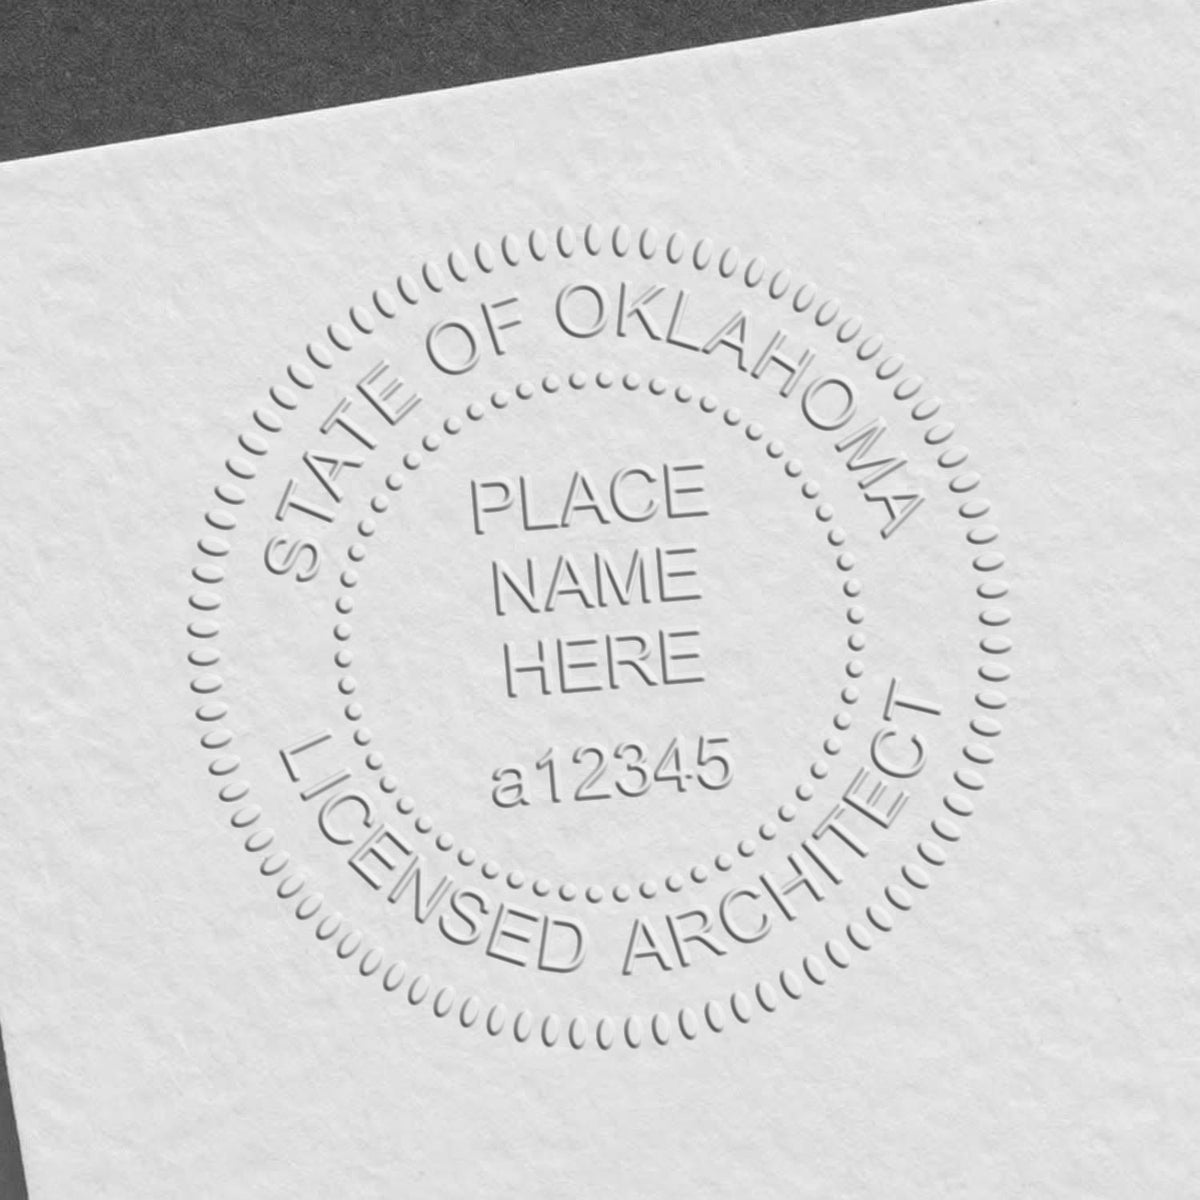 Extended Long Reach Oklahoma Architect Seal Embosser in use photo showing a stamped imprint of the Extended Long Reach Oklahoma Architect Seal Embosser